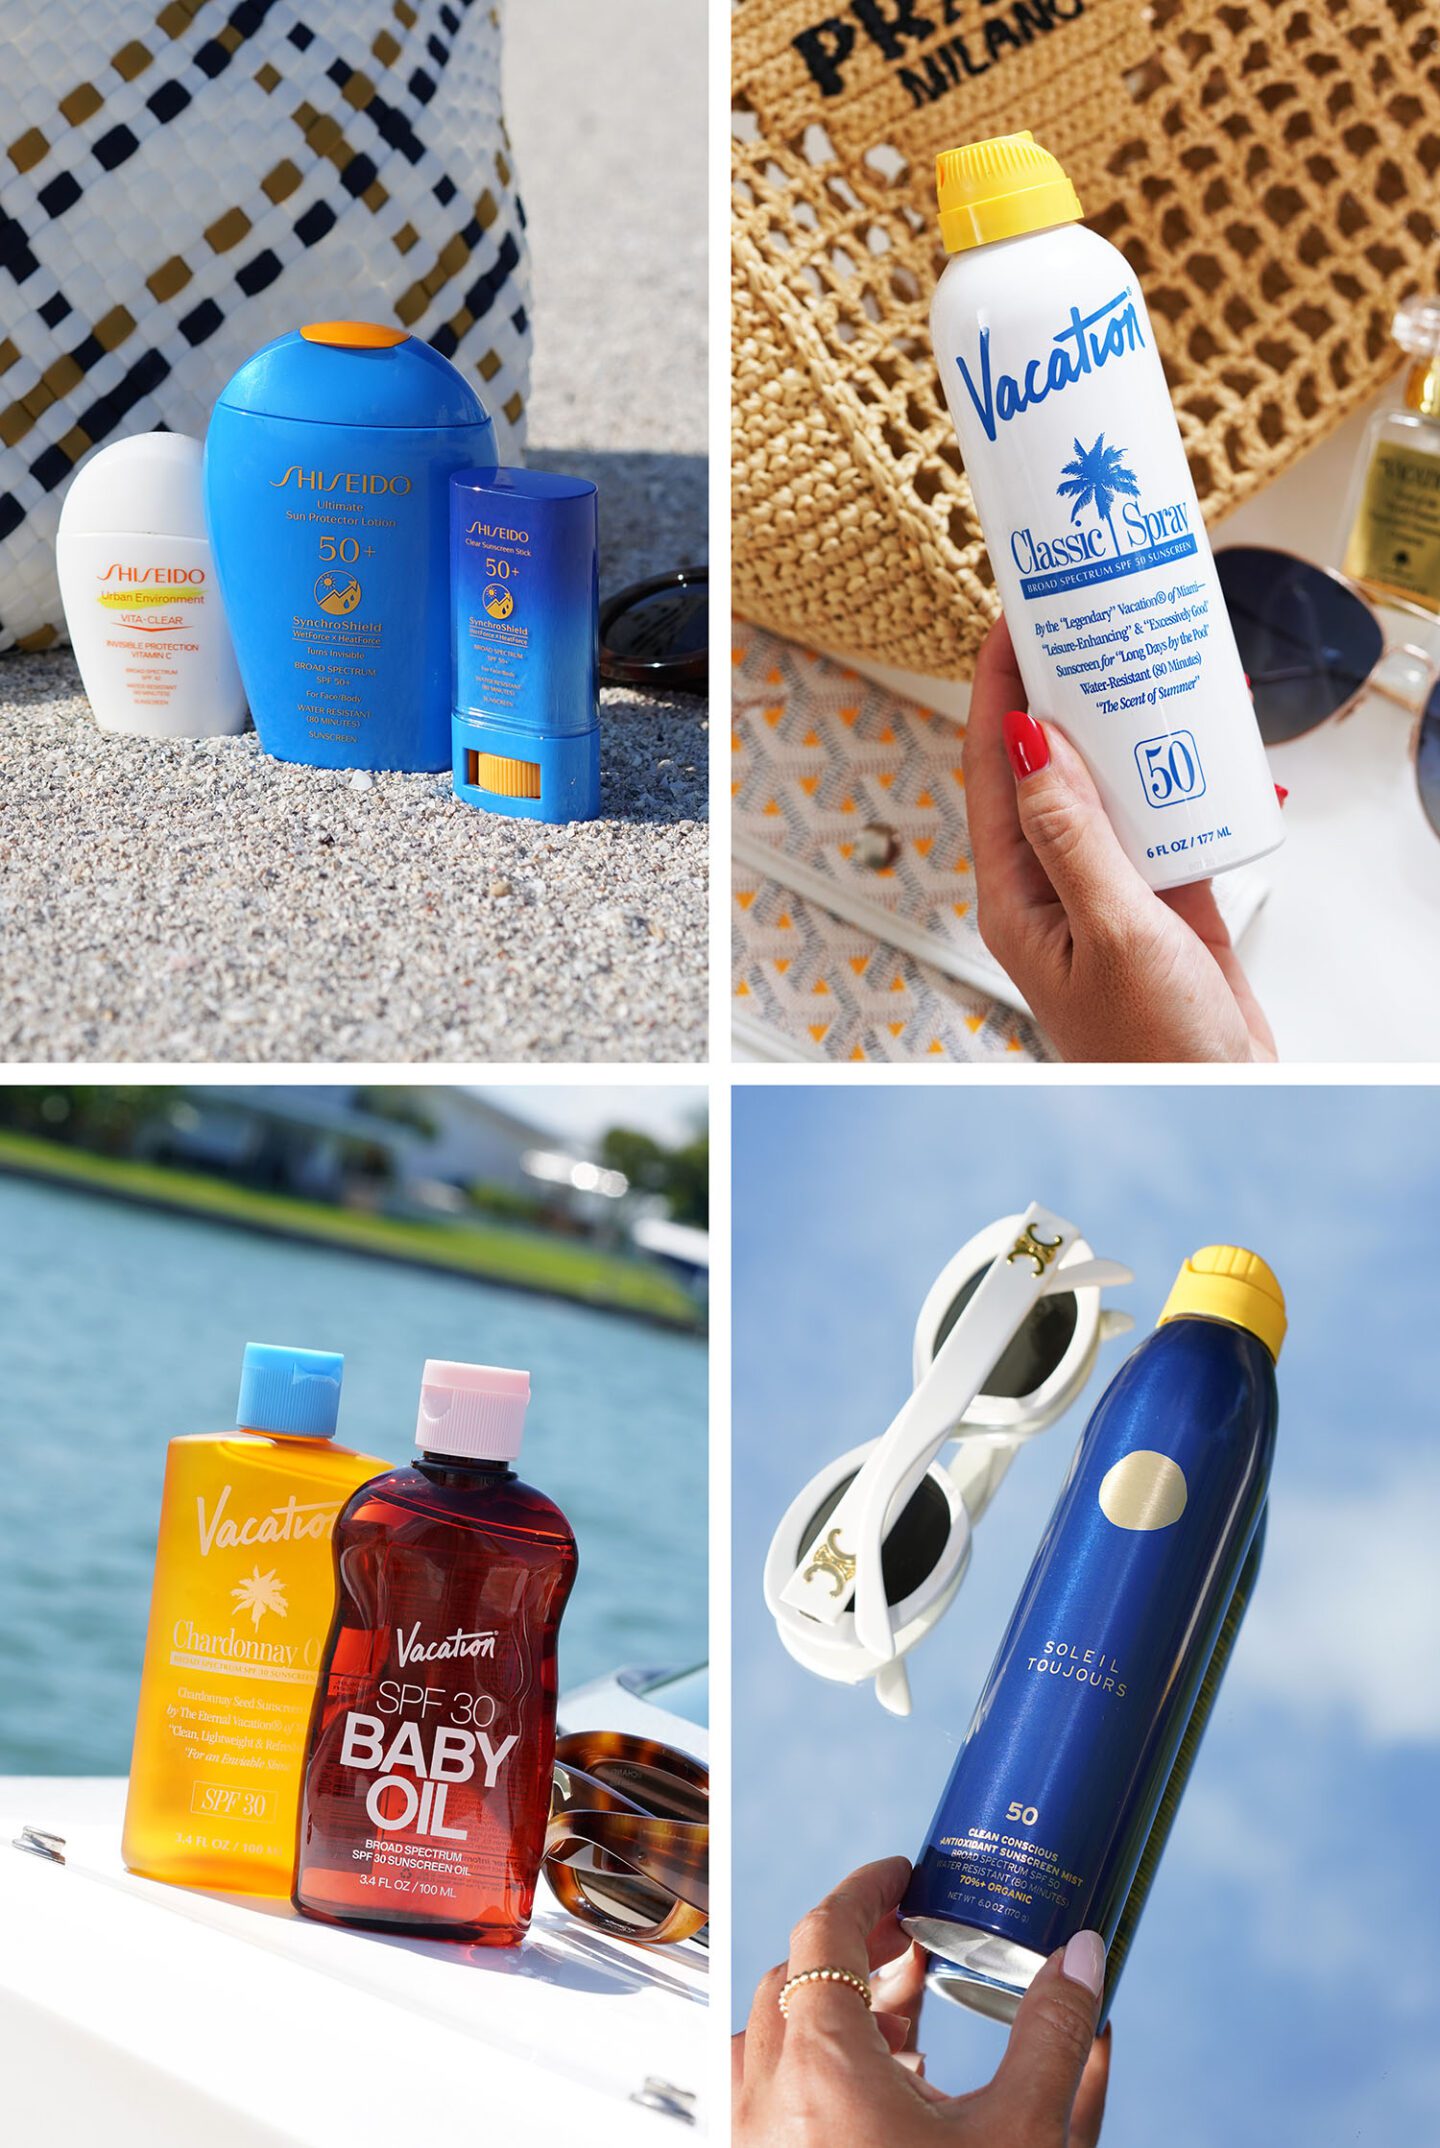 Best Body Sunscreens and Oil